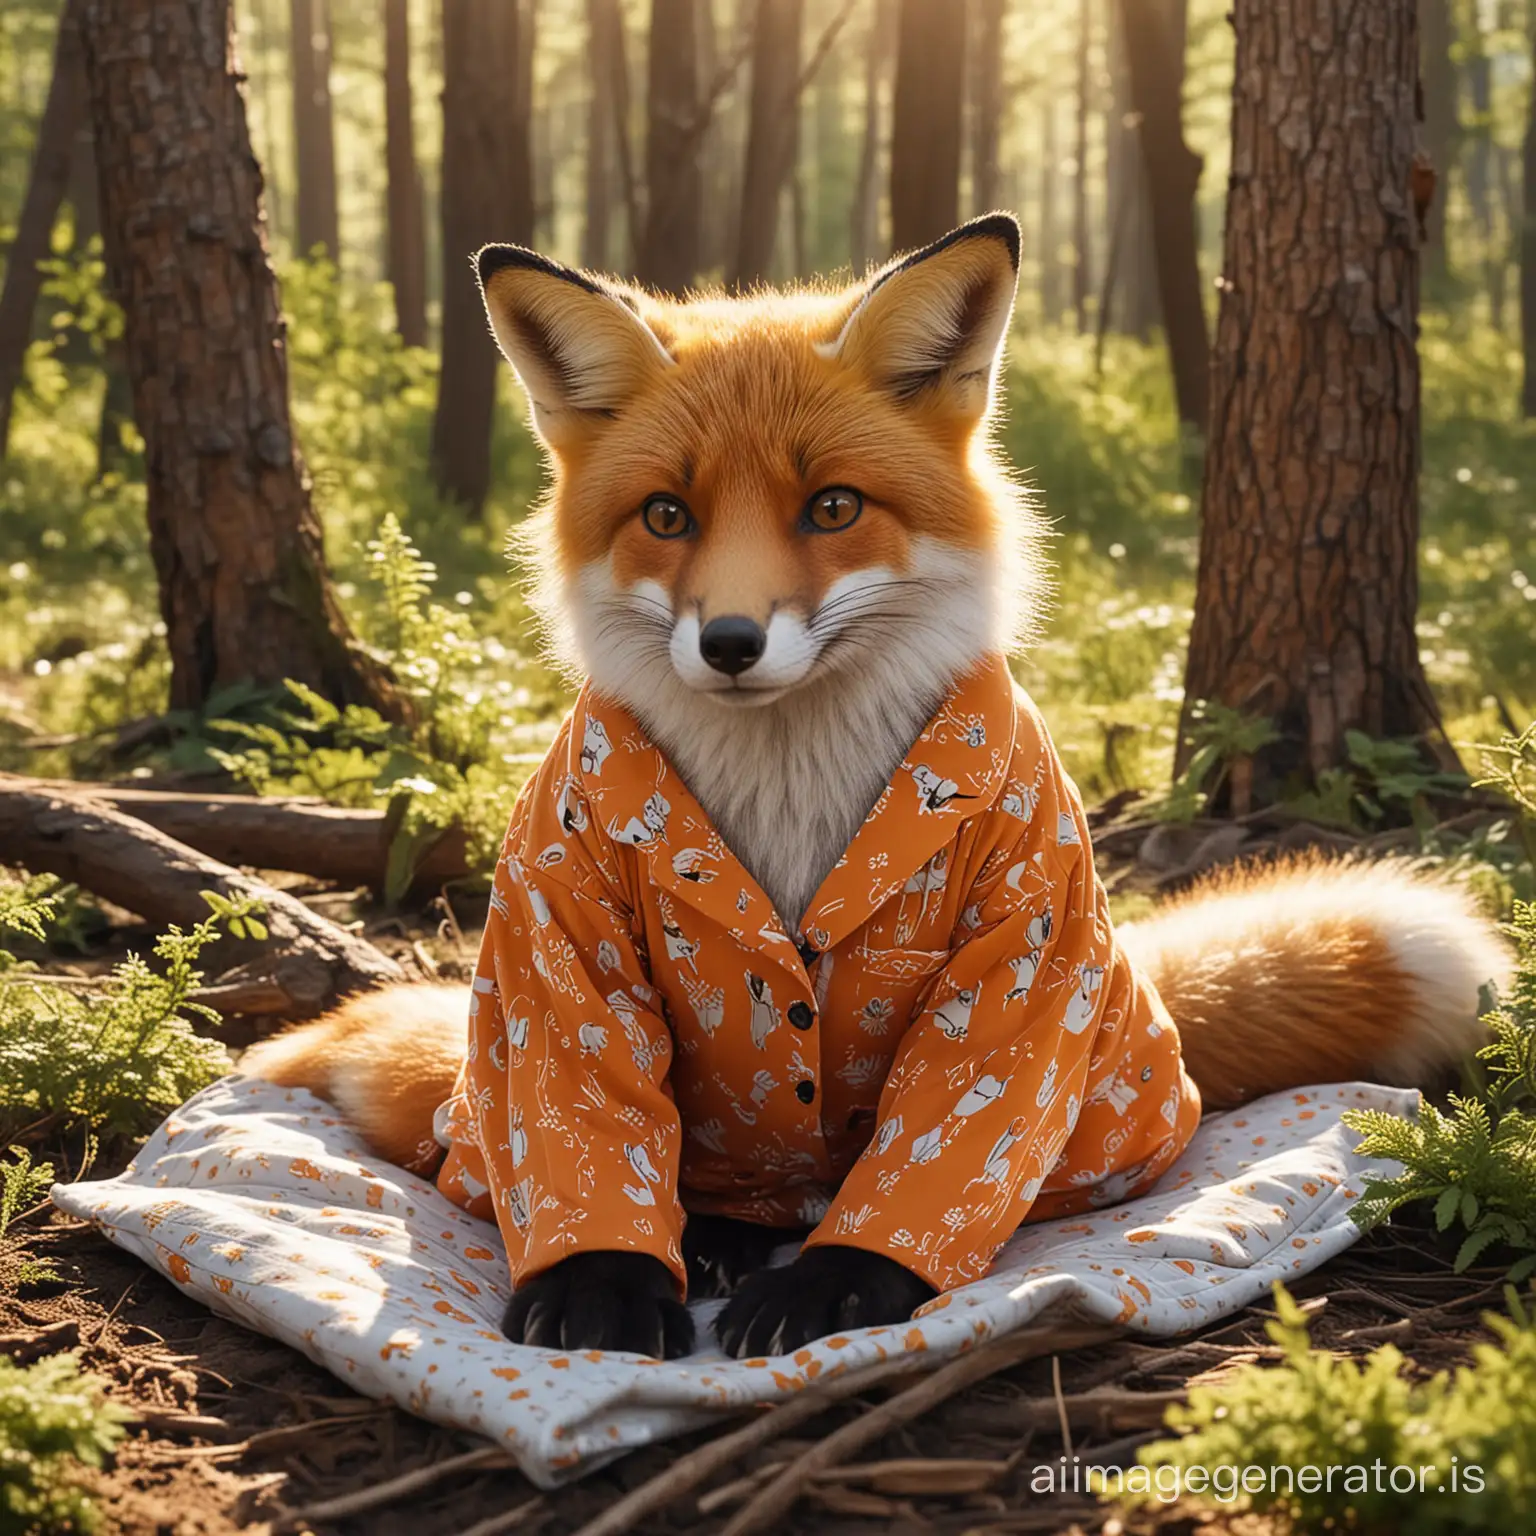 The fox in the sunny forest in pajamas